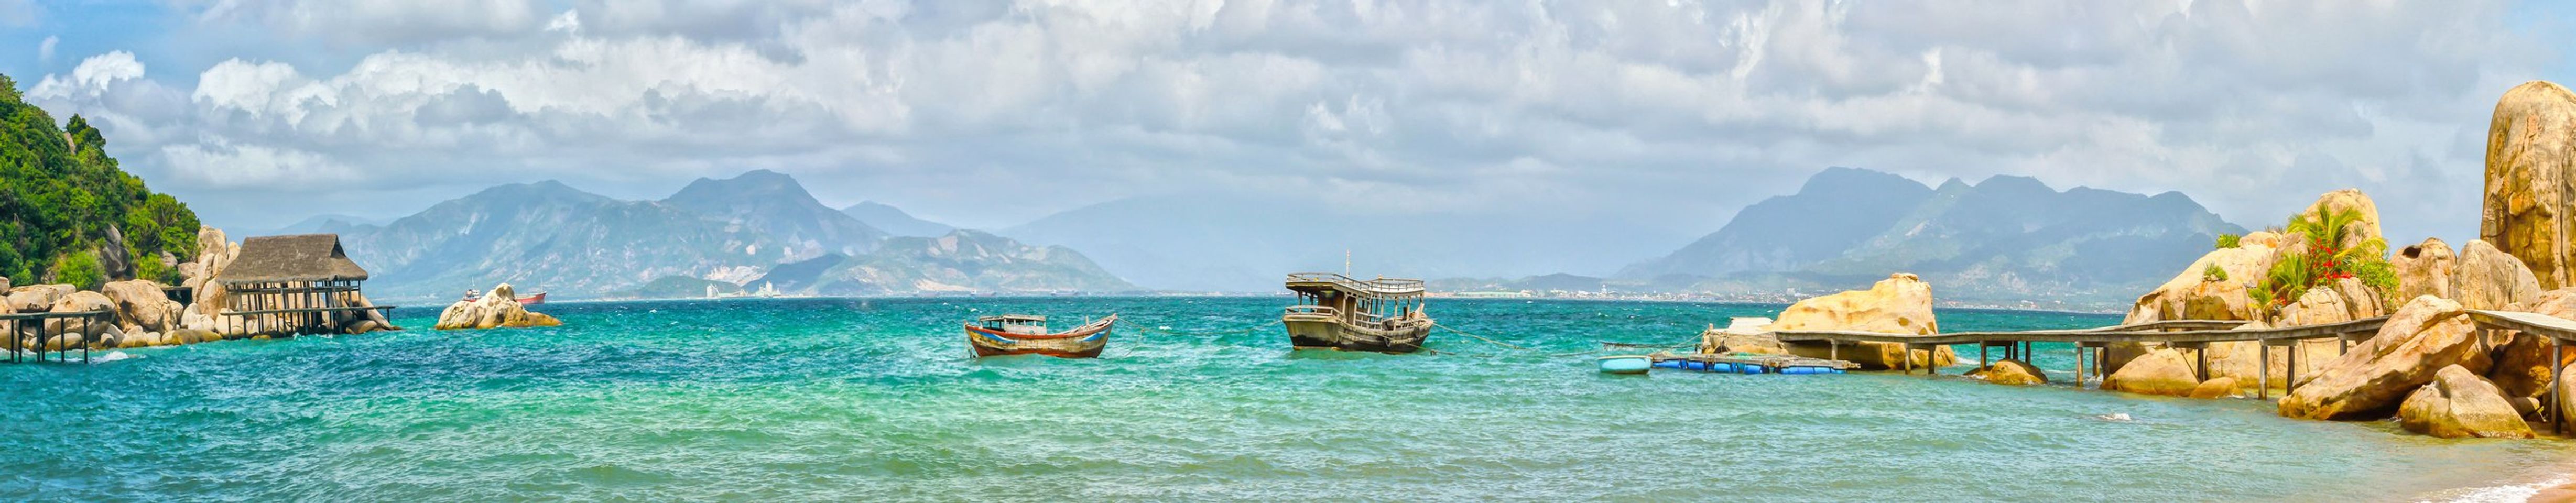 Nha Trang Travel Guide: Insider Tips for an Unforgettable Trip